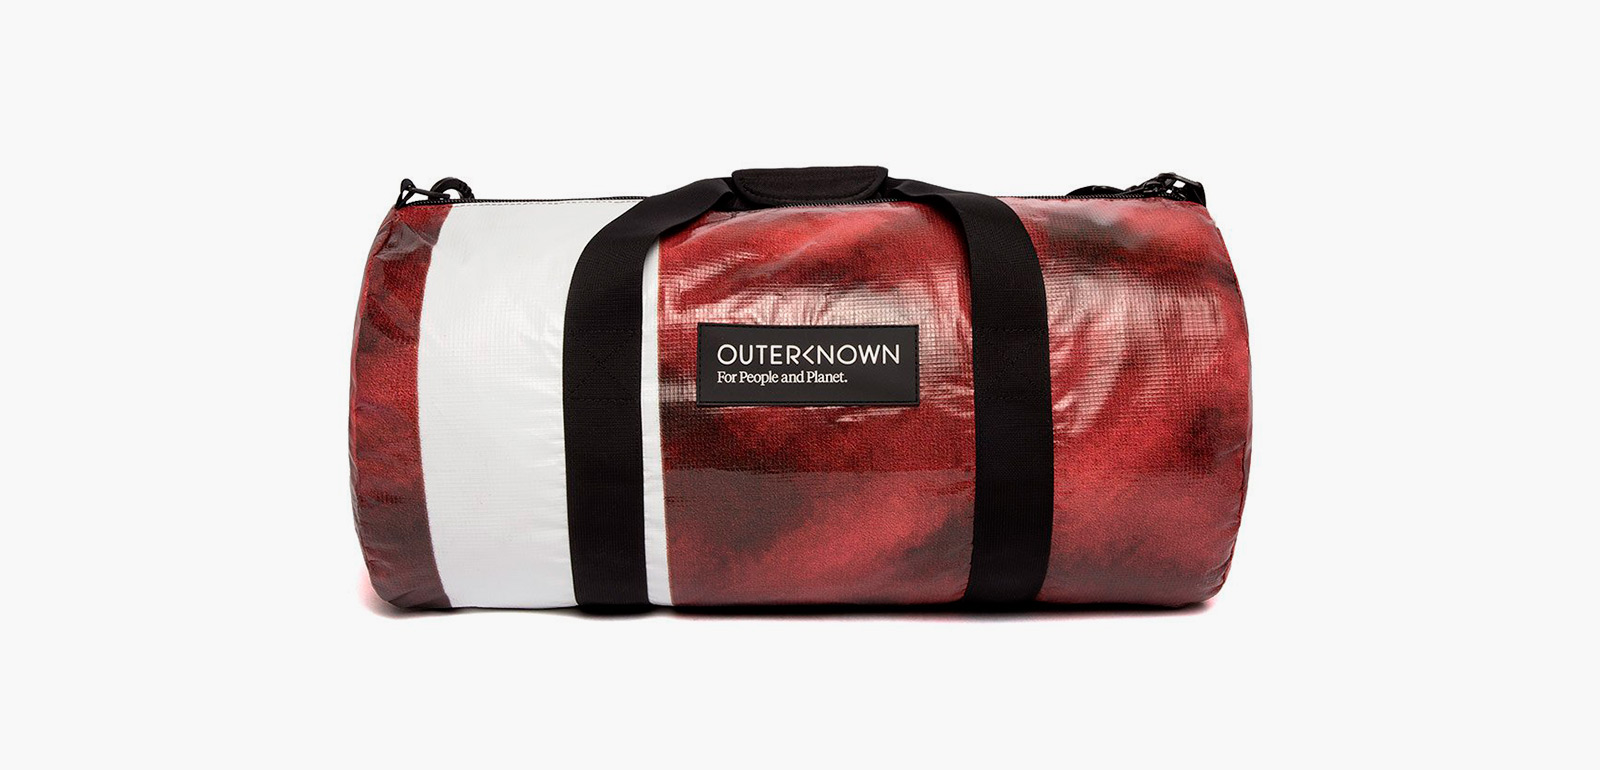 duffle bags made from billboards